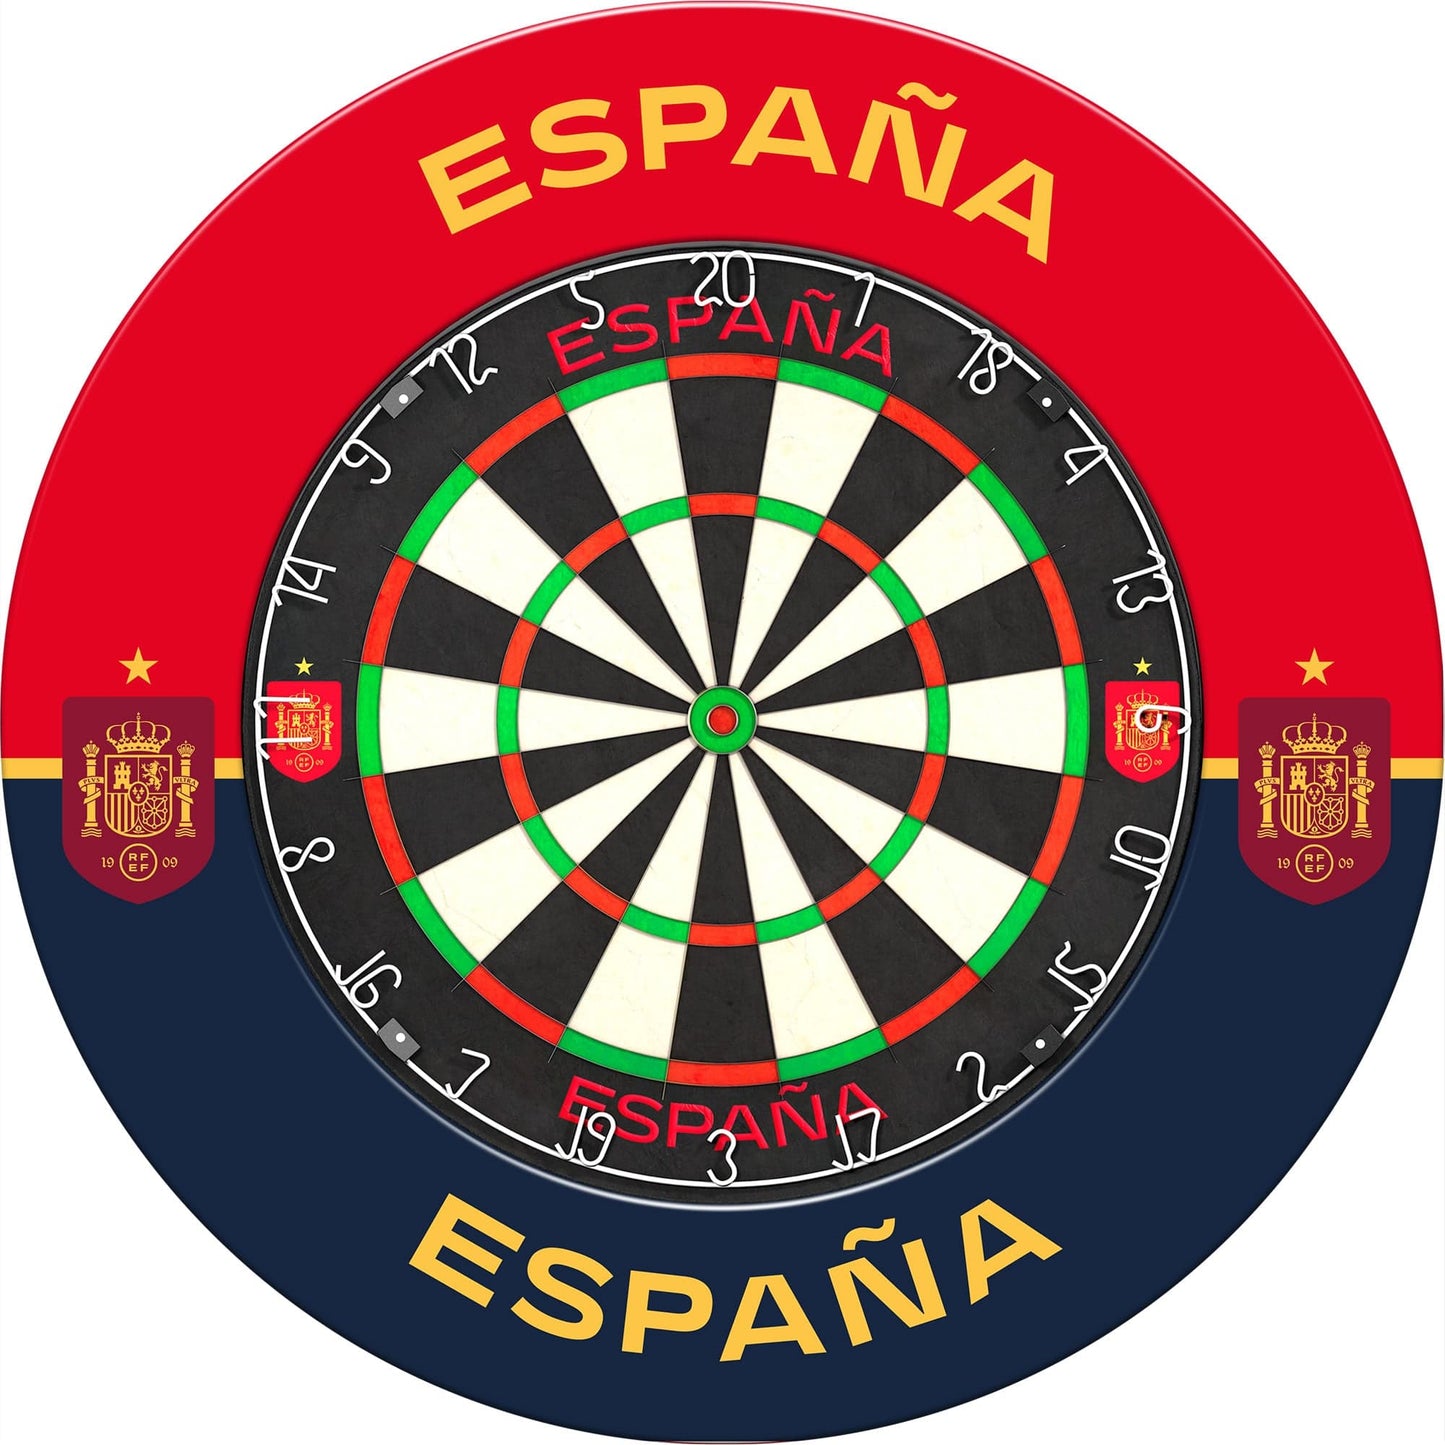 Espana Football Dartboard Surround - Official Licensed - S4 - Spain - Blue & Red